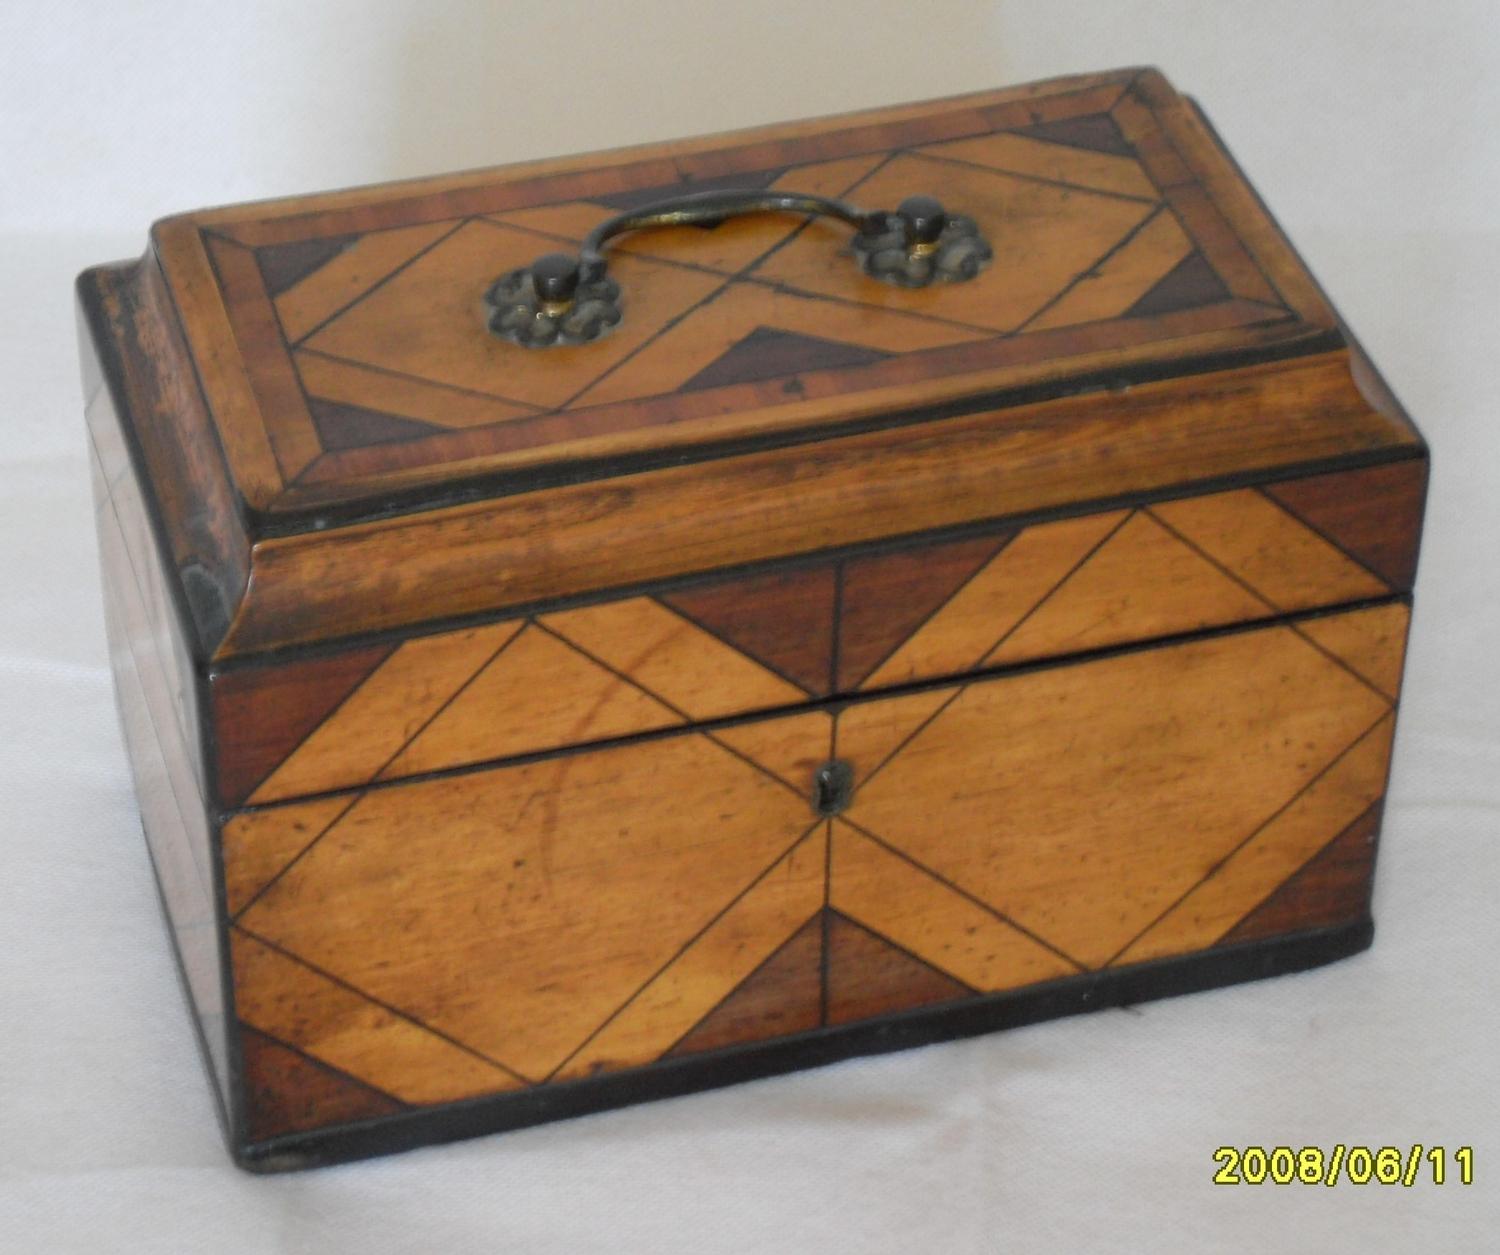 A Regency rectangular tea caddy composed of contrasting mahogany and satinwood with string inlay